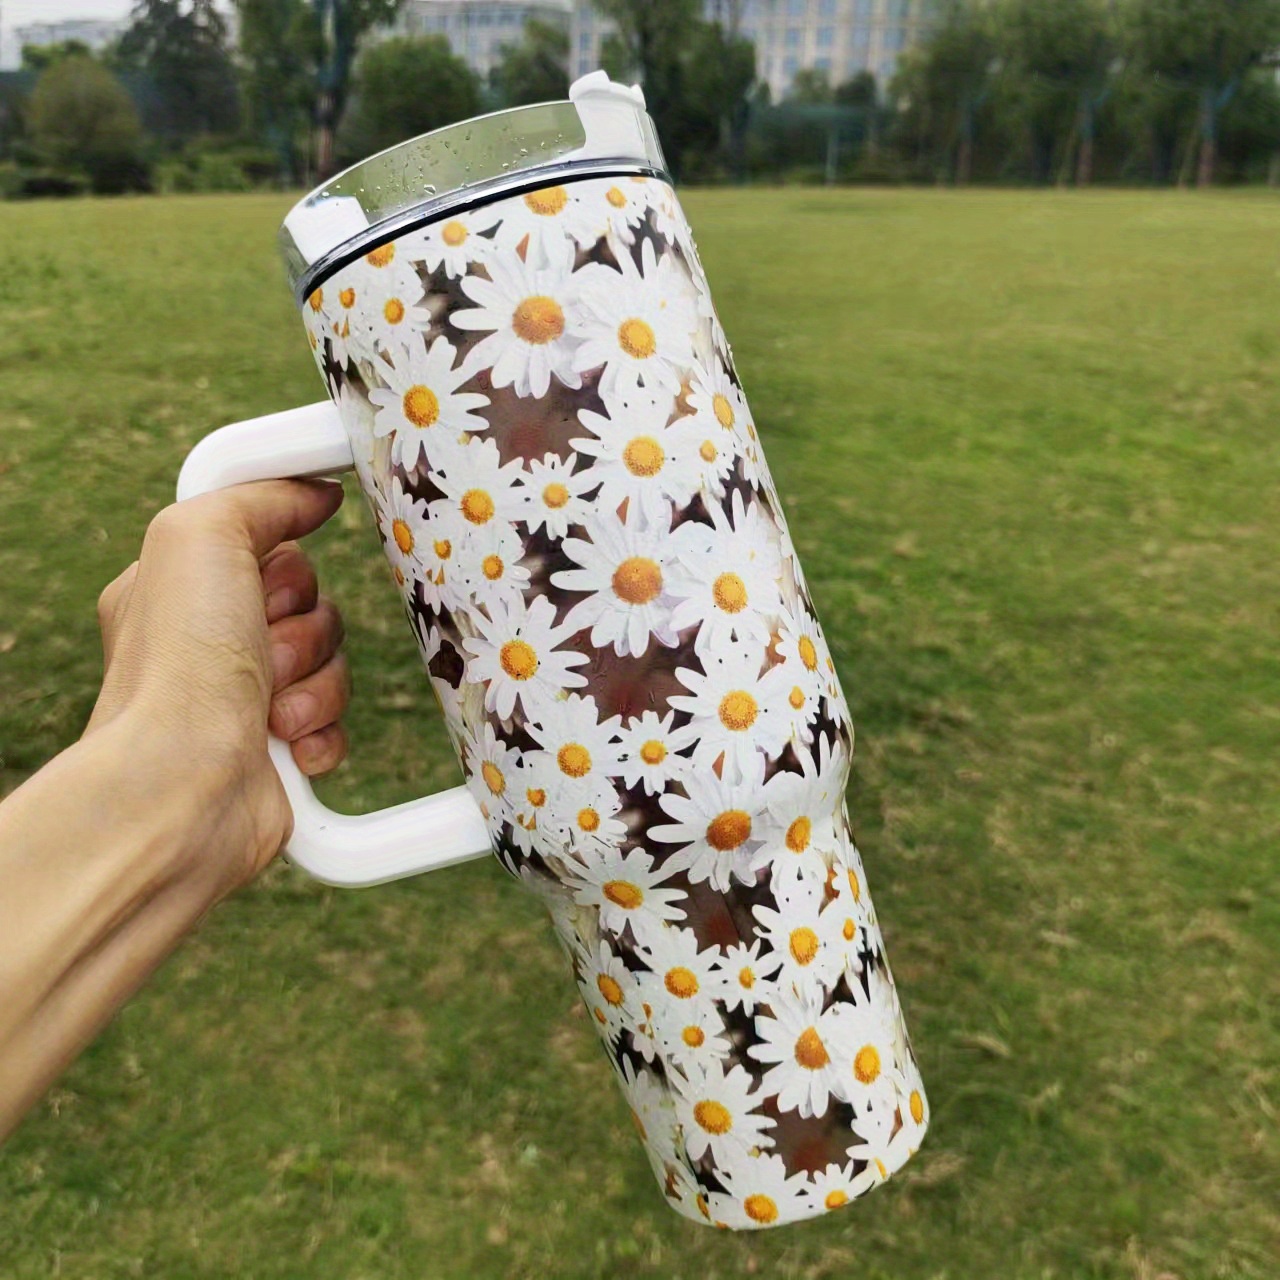 1200ml/40oz Insulated Tumbler With Handle And Straw, Stainless Steel  Leakproof Tumbler With Handle, Outdoor Travel Car Cup With Straw, Dustproof  Cup Cover And Silicone Handle, Reusable Water Bottle With Straw And Cup